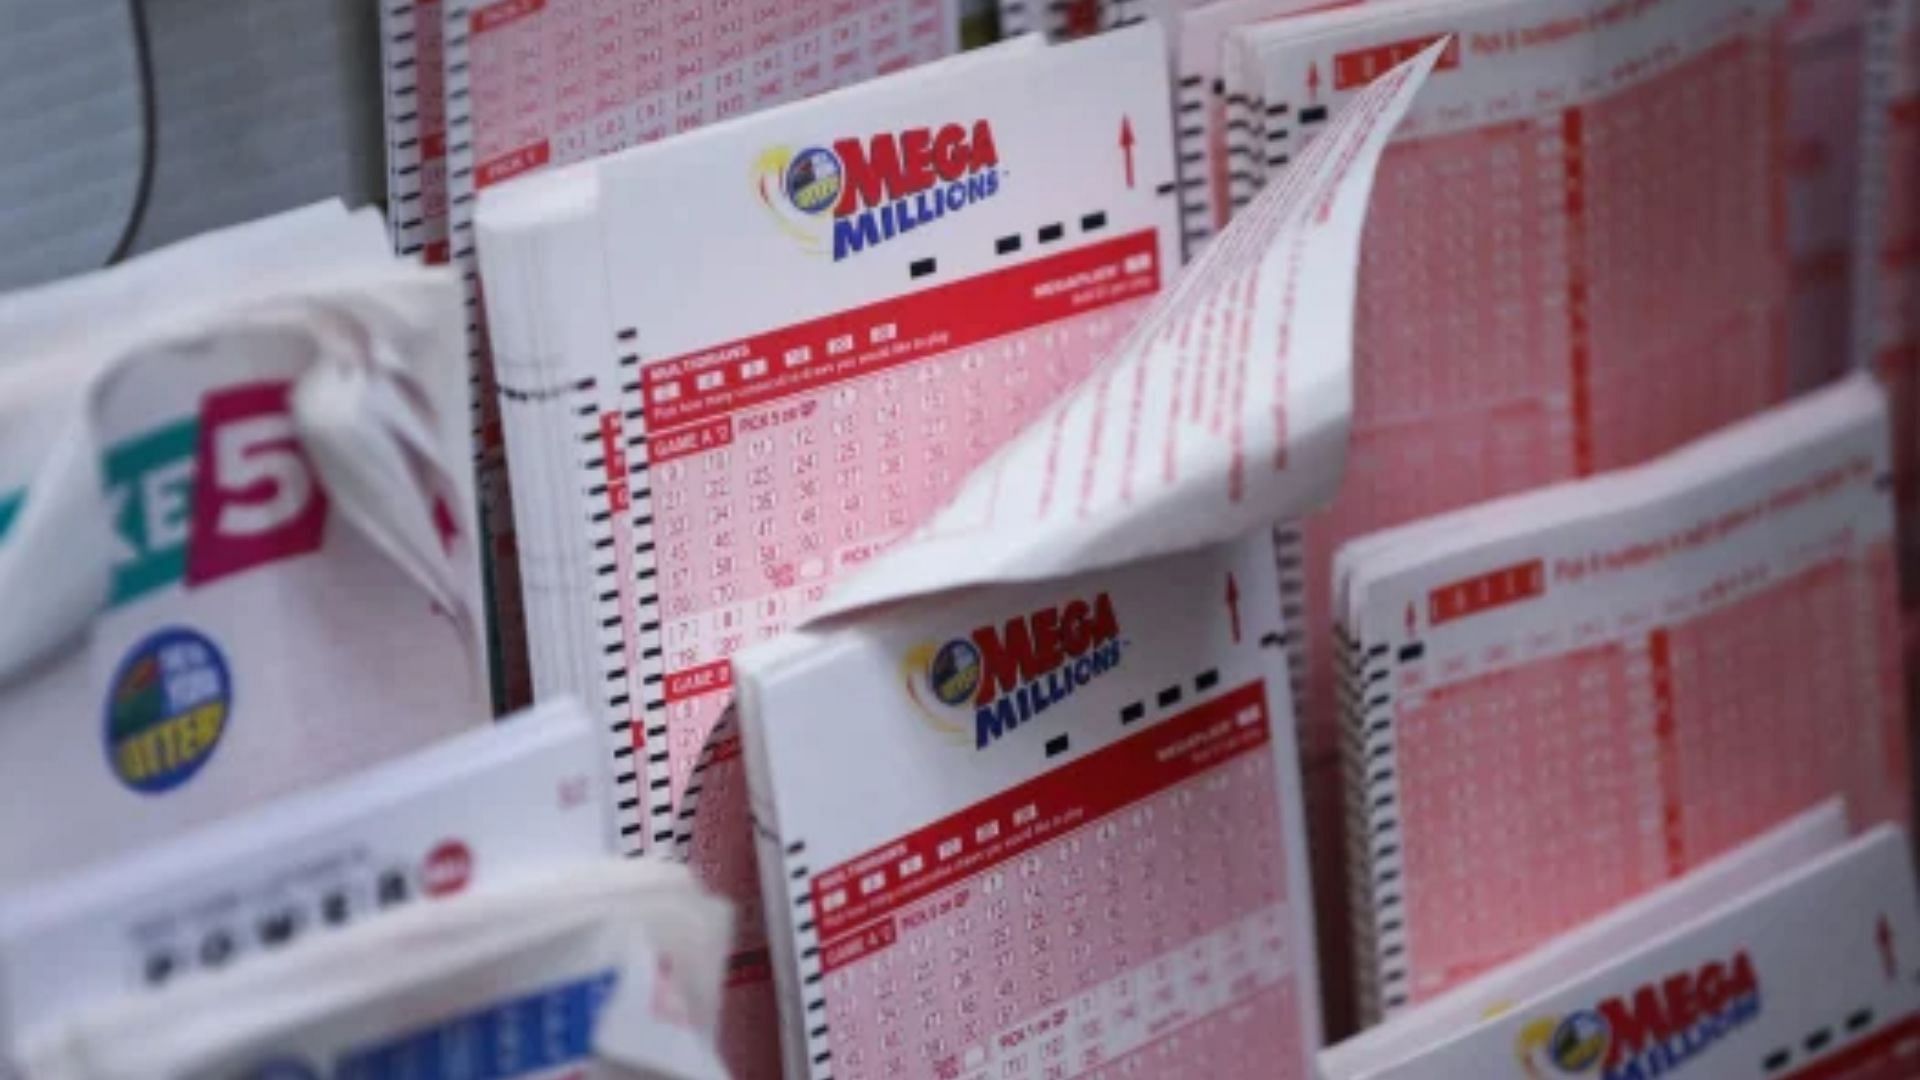 The Mega Millions jackpot ballooned up to $630 million on July 19 (Image via Getty Images/Drew Angerer)